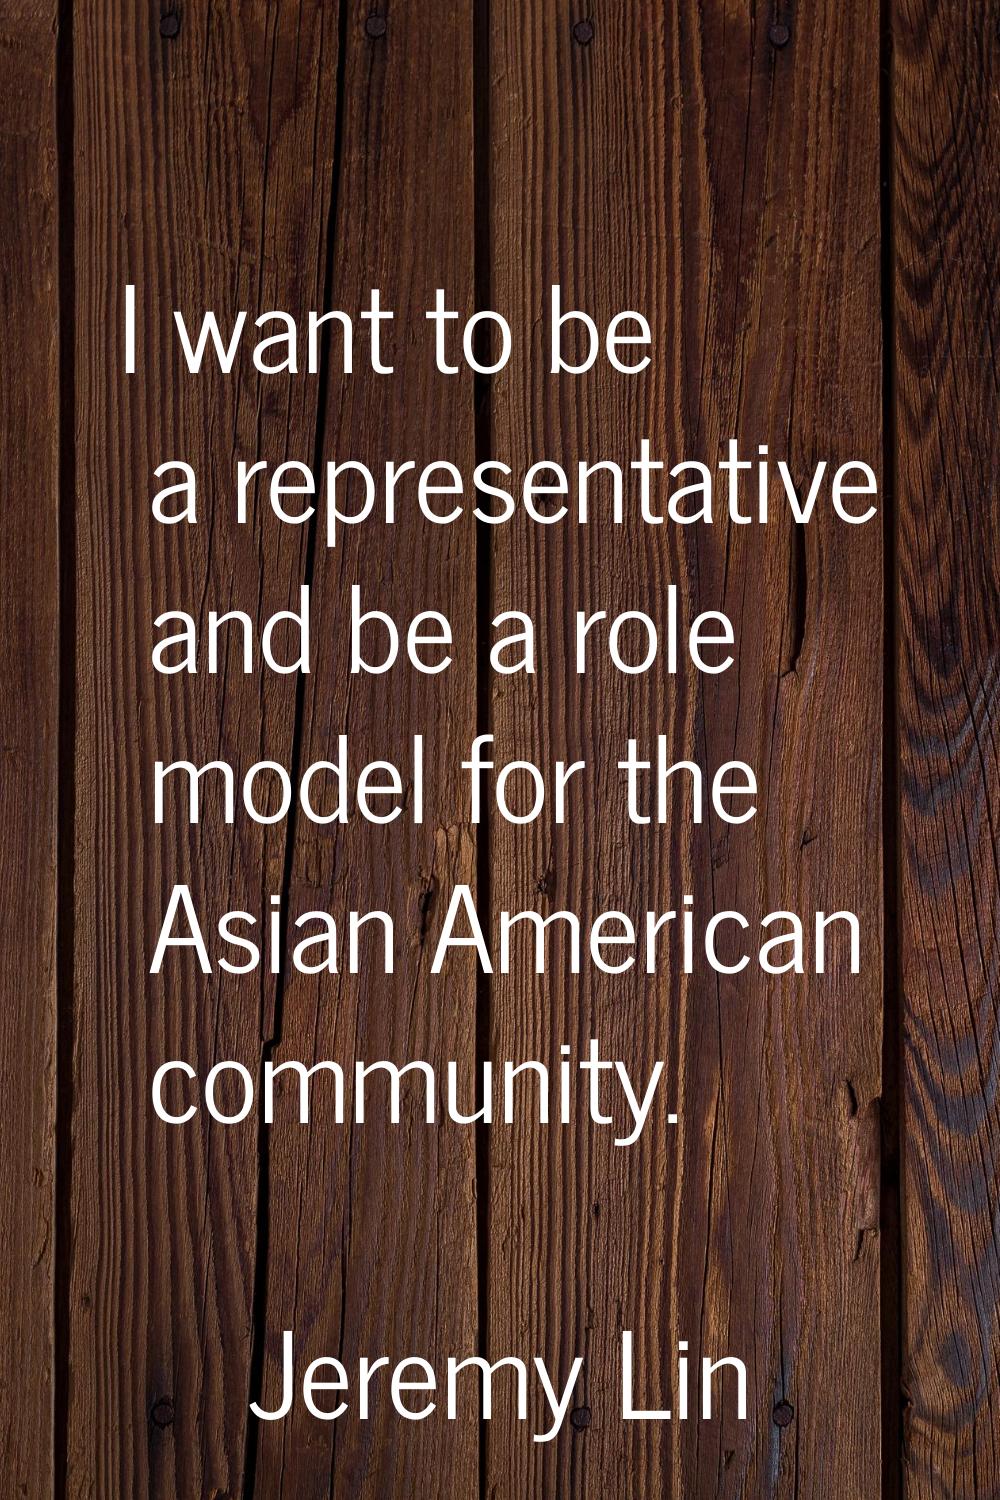 I want to be a representative and be a role model for the Asian American community.